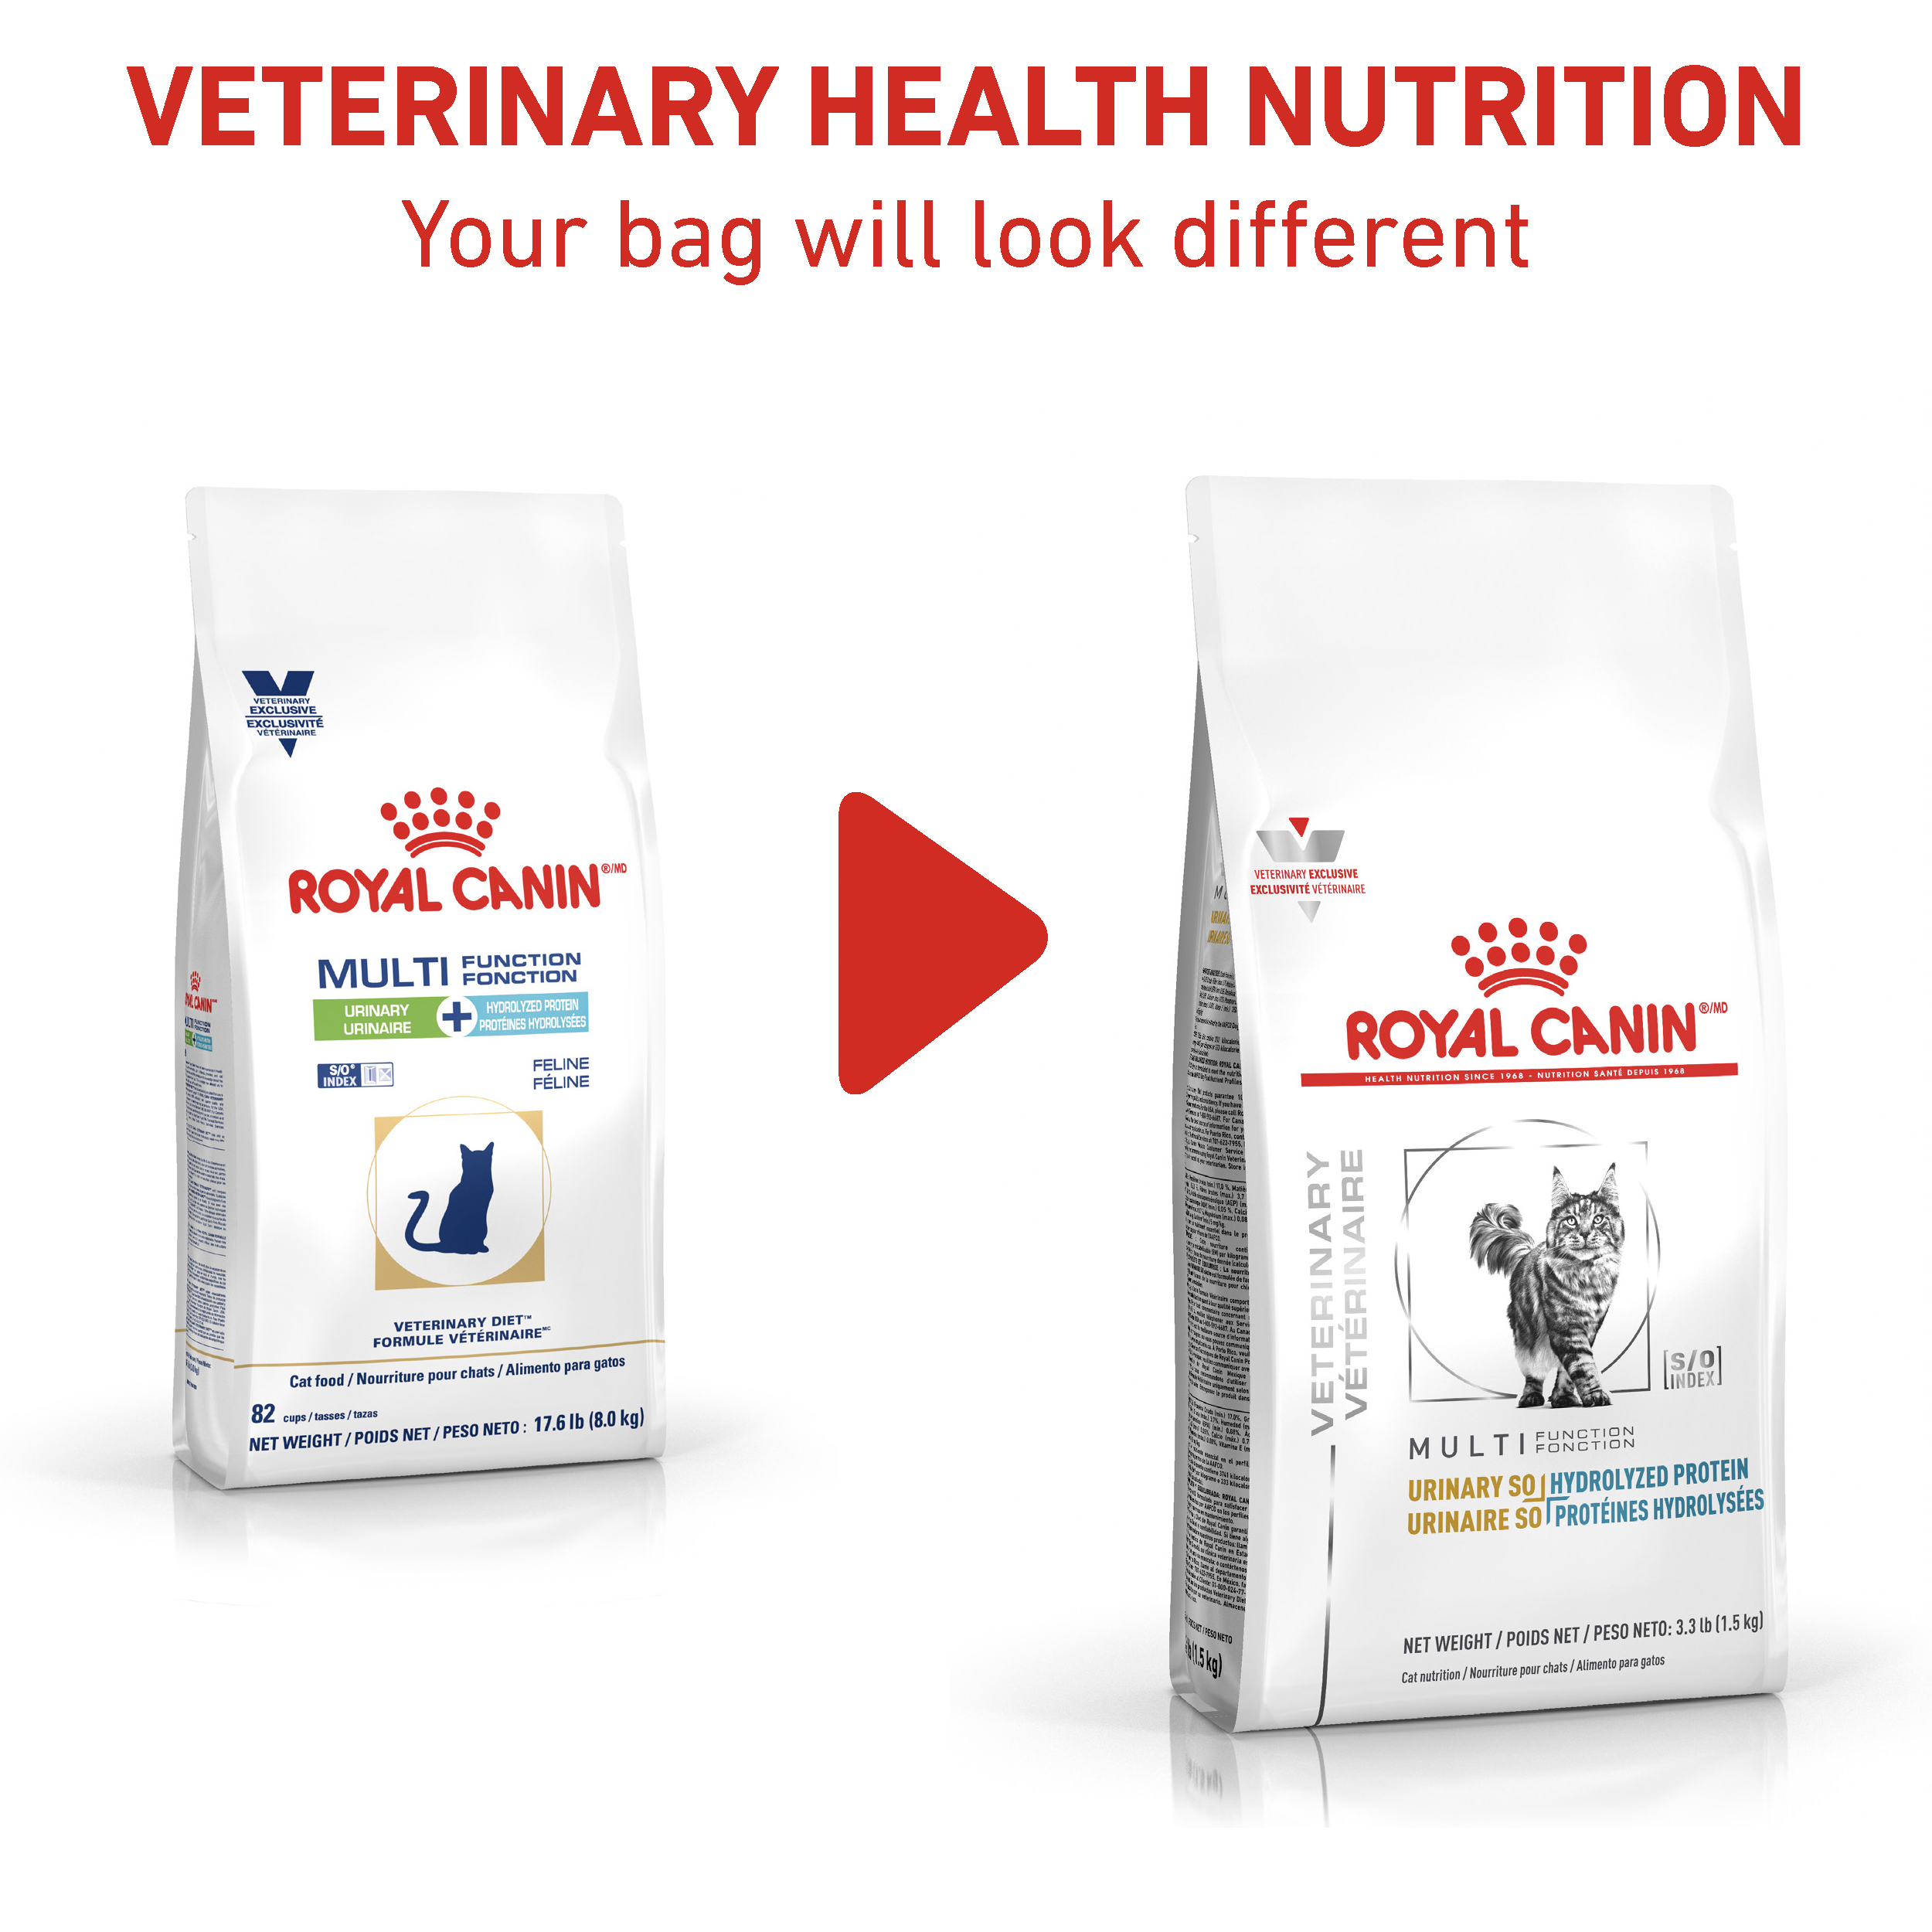 Royal Canin Hydrolyzed Protein Cat Food Reviews